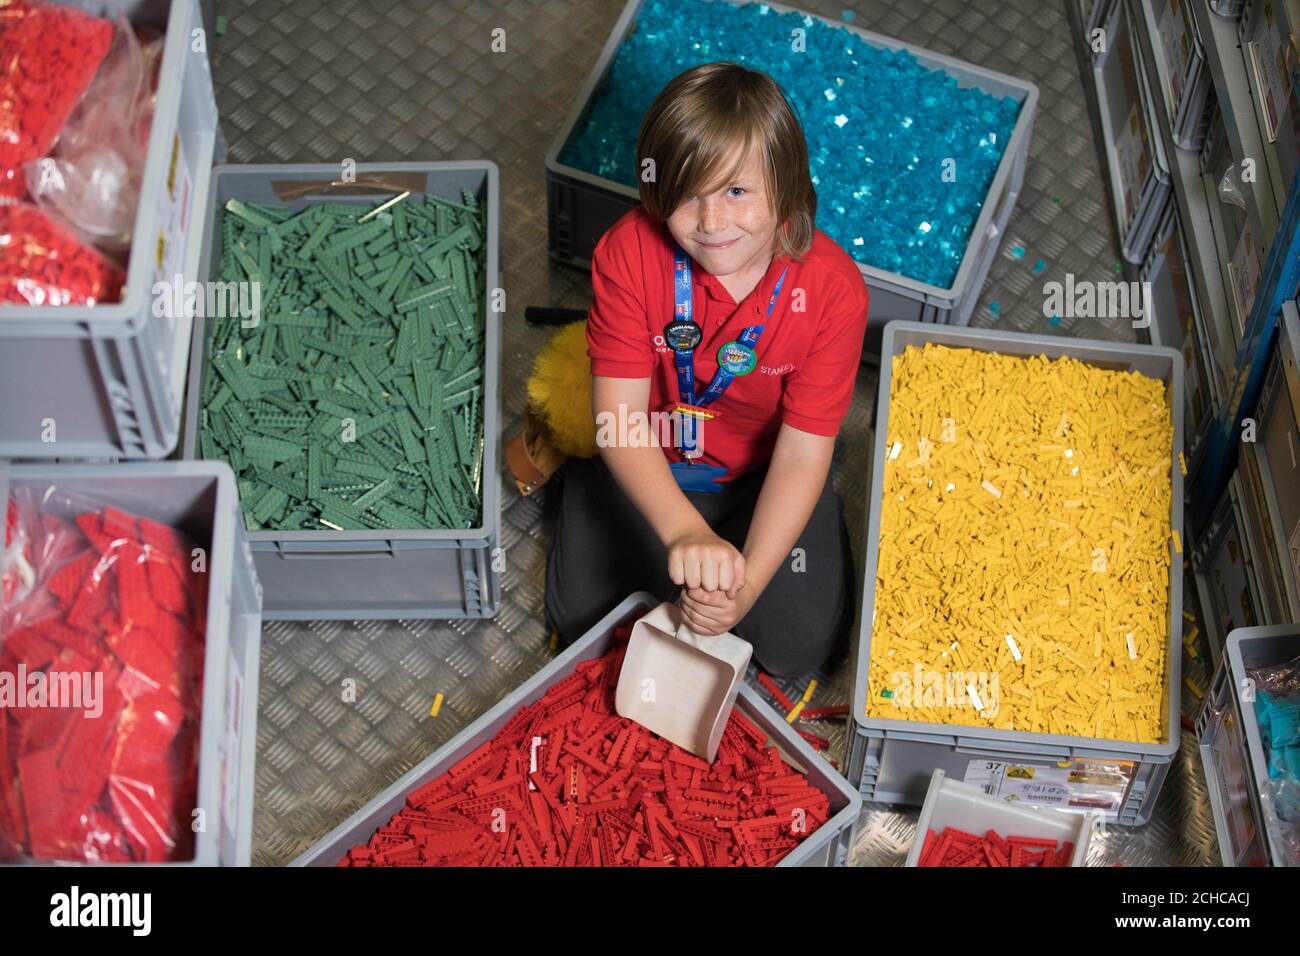 Stanley Bolland, six, from Hampshire, undertakes some work experience as a 'Model Maker' at the Legoland Windsor Resort in Berkshire, after writing a letter applying for a job he saw advertised at the attraction in his local newspaper. PRESS ASSOCIATION. Issue date: Sunday September 3, 2017. Photo credit should read: David Parry/PA Wire Stock Photo